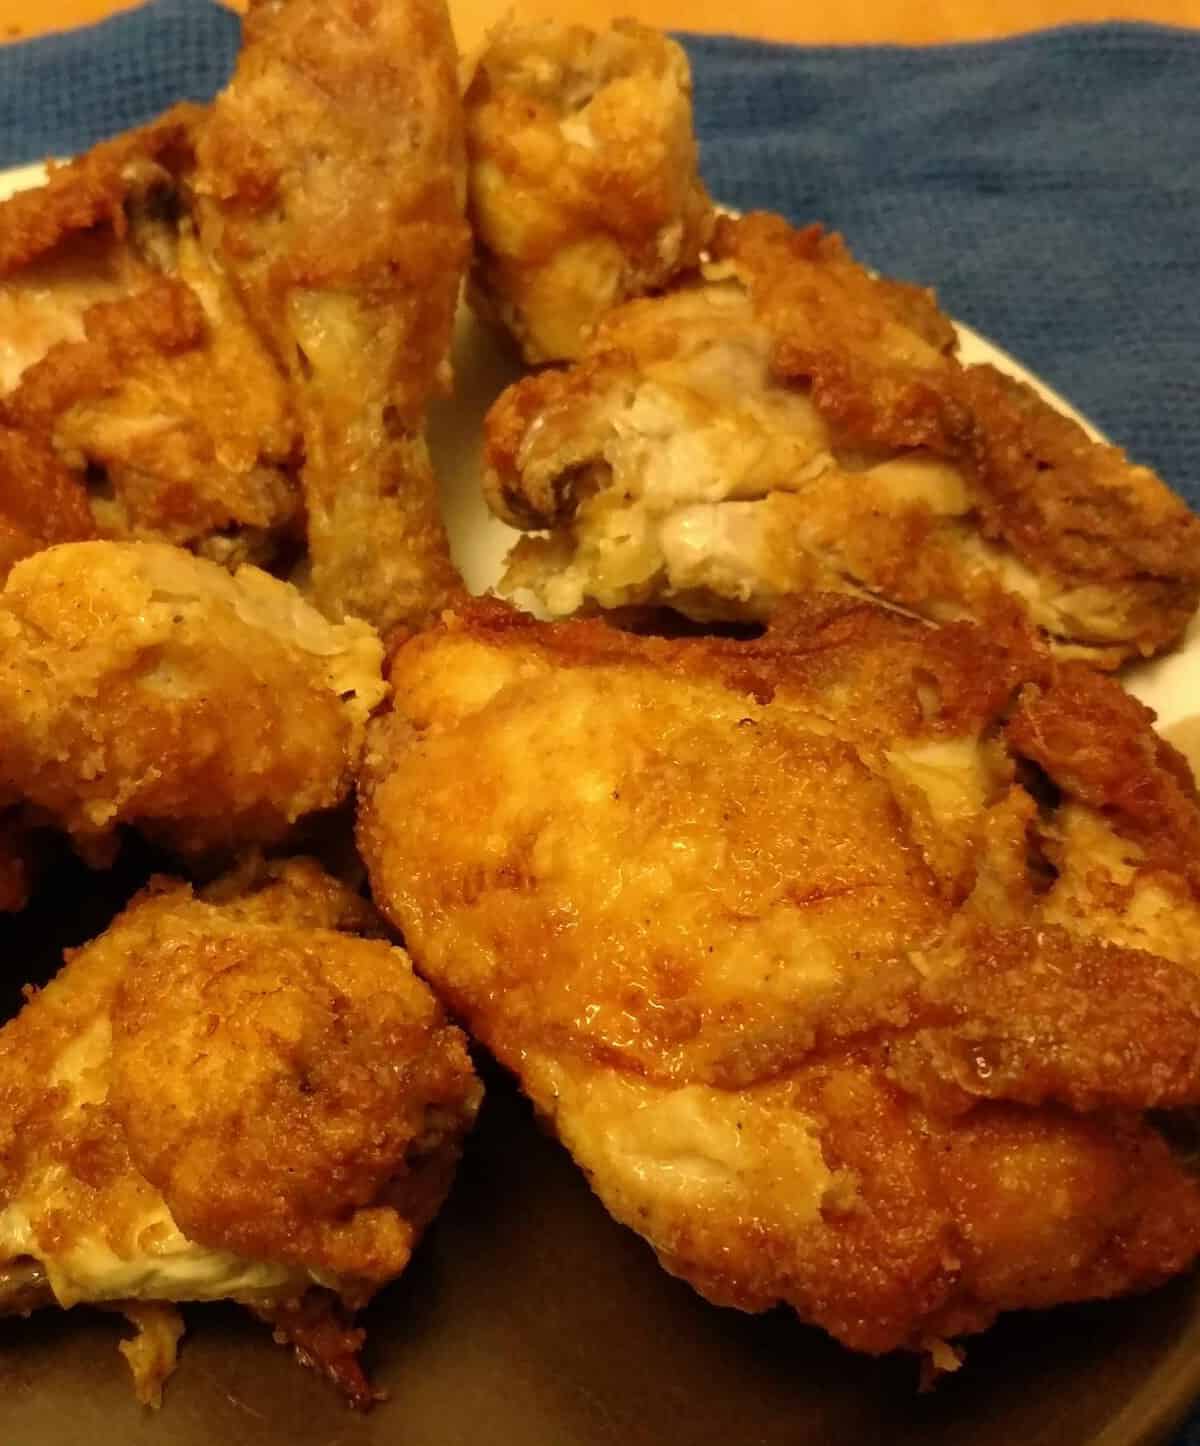  Get ready to sink your teeth into some delicious and crispy fried chicken!